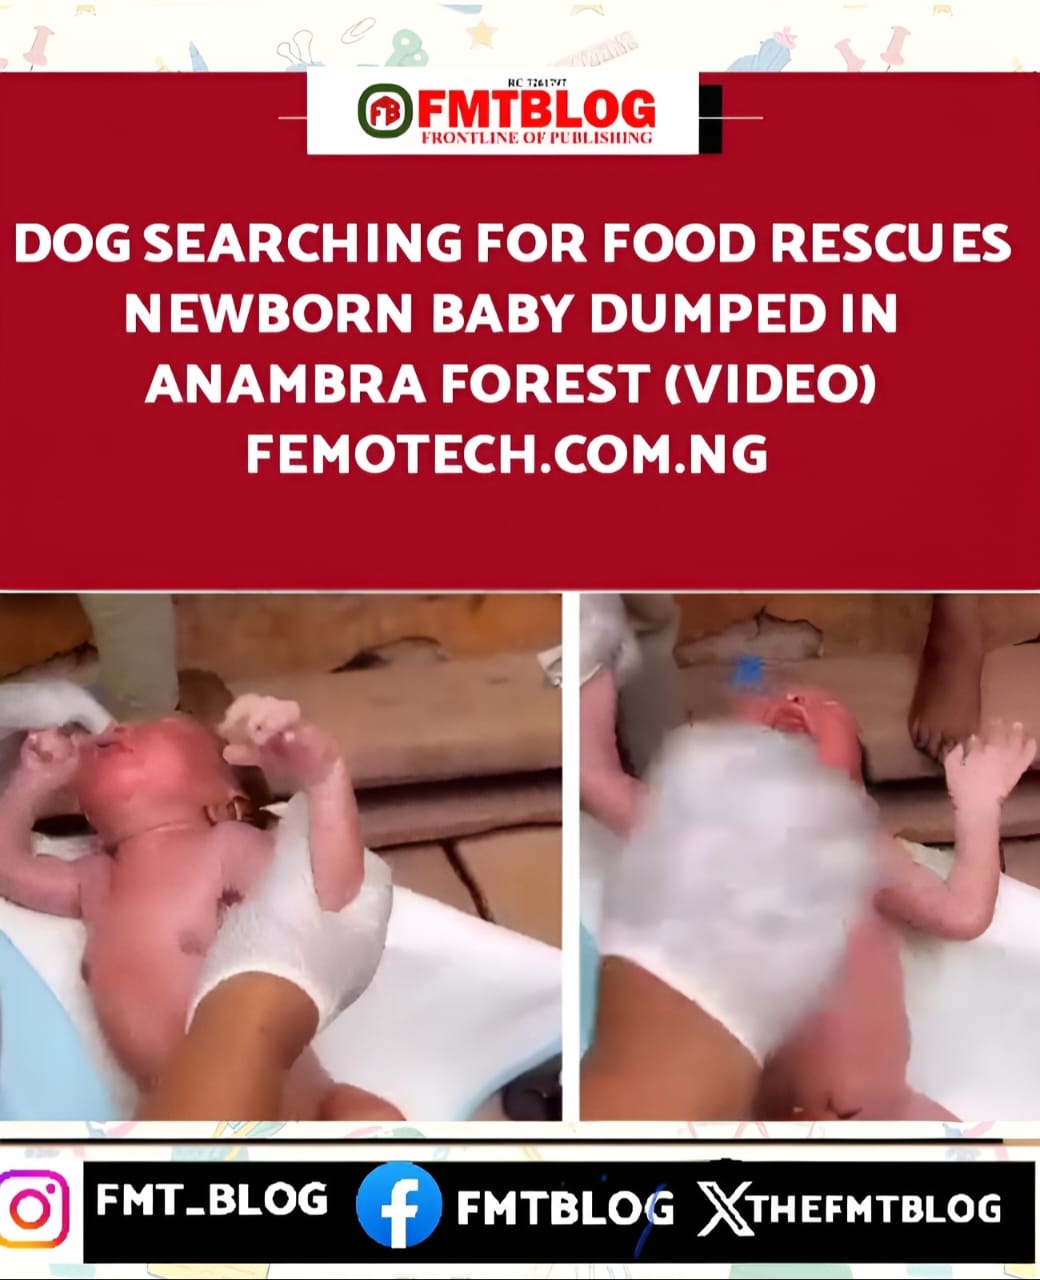 Dog Searching For Food Rescues Newborn Baby Dumped In Anambra Forest (VIDEO)